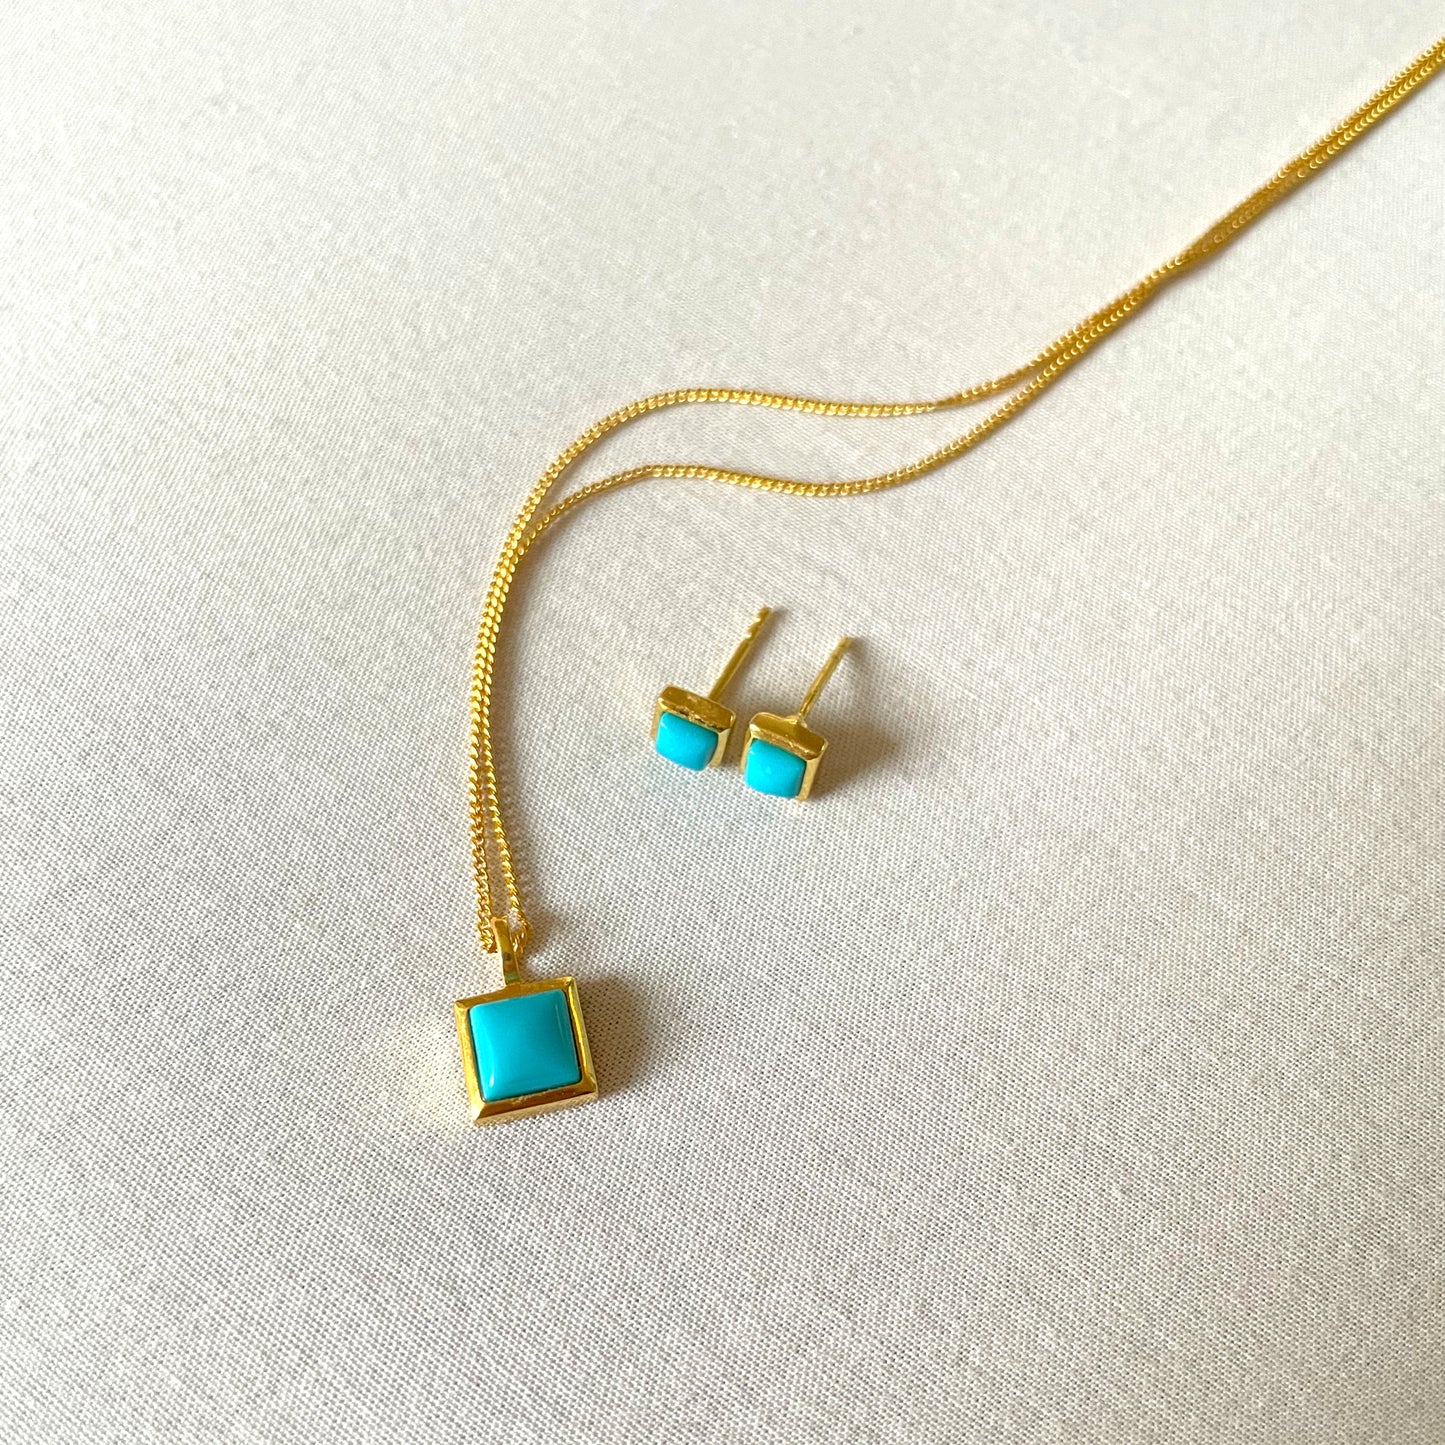 Turquoise Gold Earrings, Crystal Earrings, Gold Plated on 925 Sterling Silver, handmade gemstone earrings, Turquoise Studs Unique Gift, turquoise stud earrings, gemstones, gold studs, Crystal, Christmas gift ideas, small business, london, dainty stud